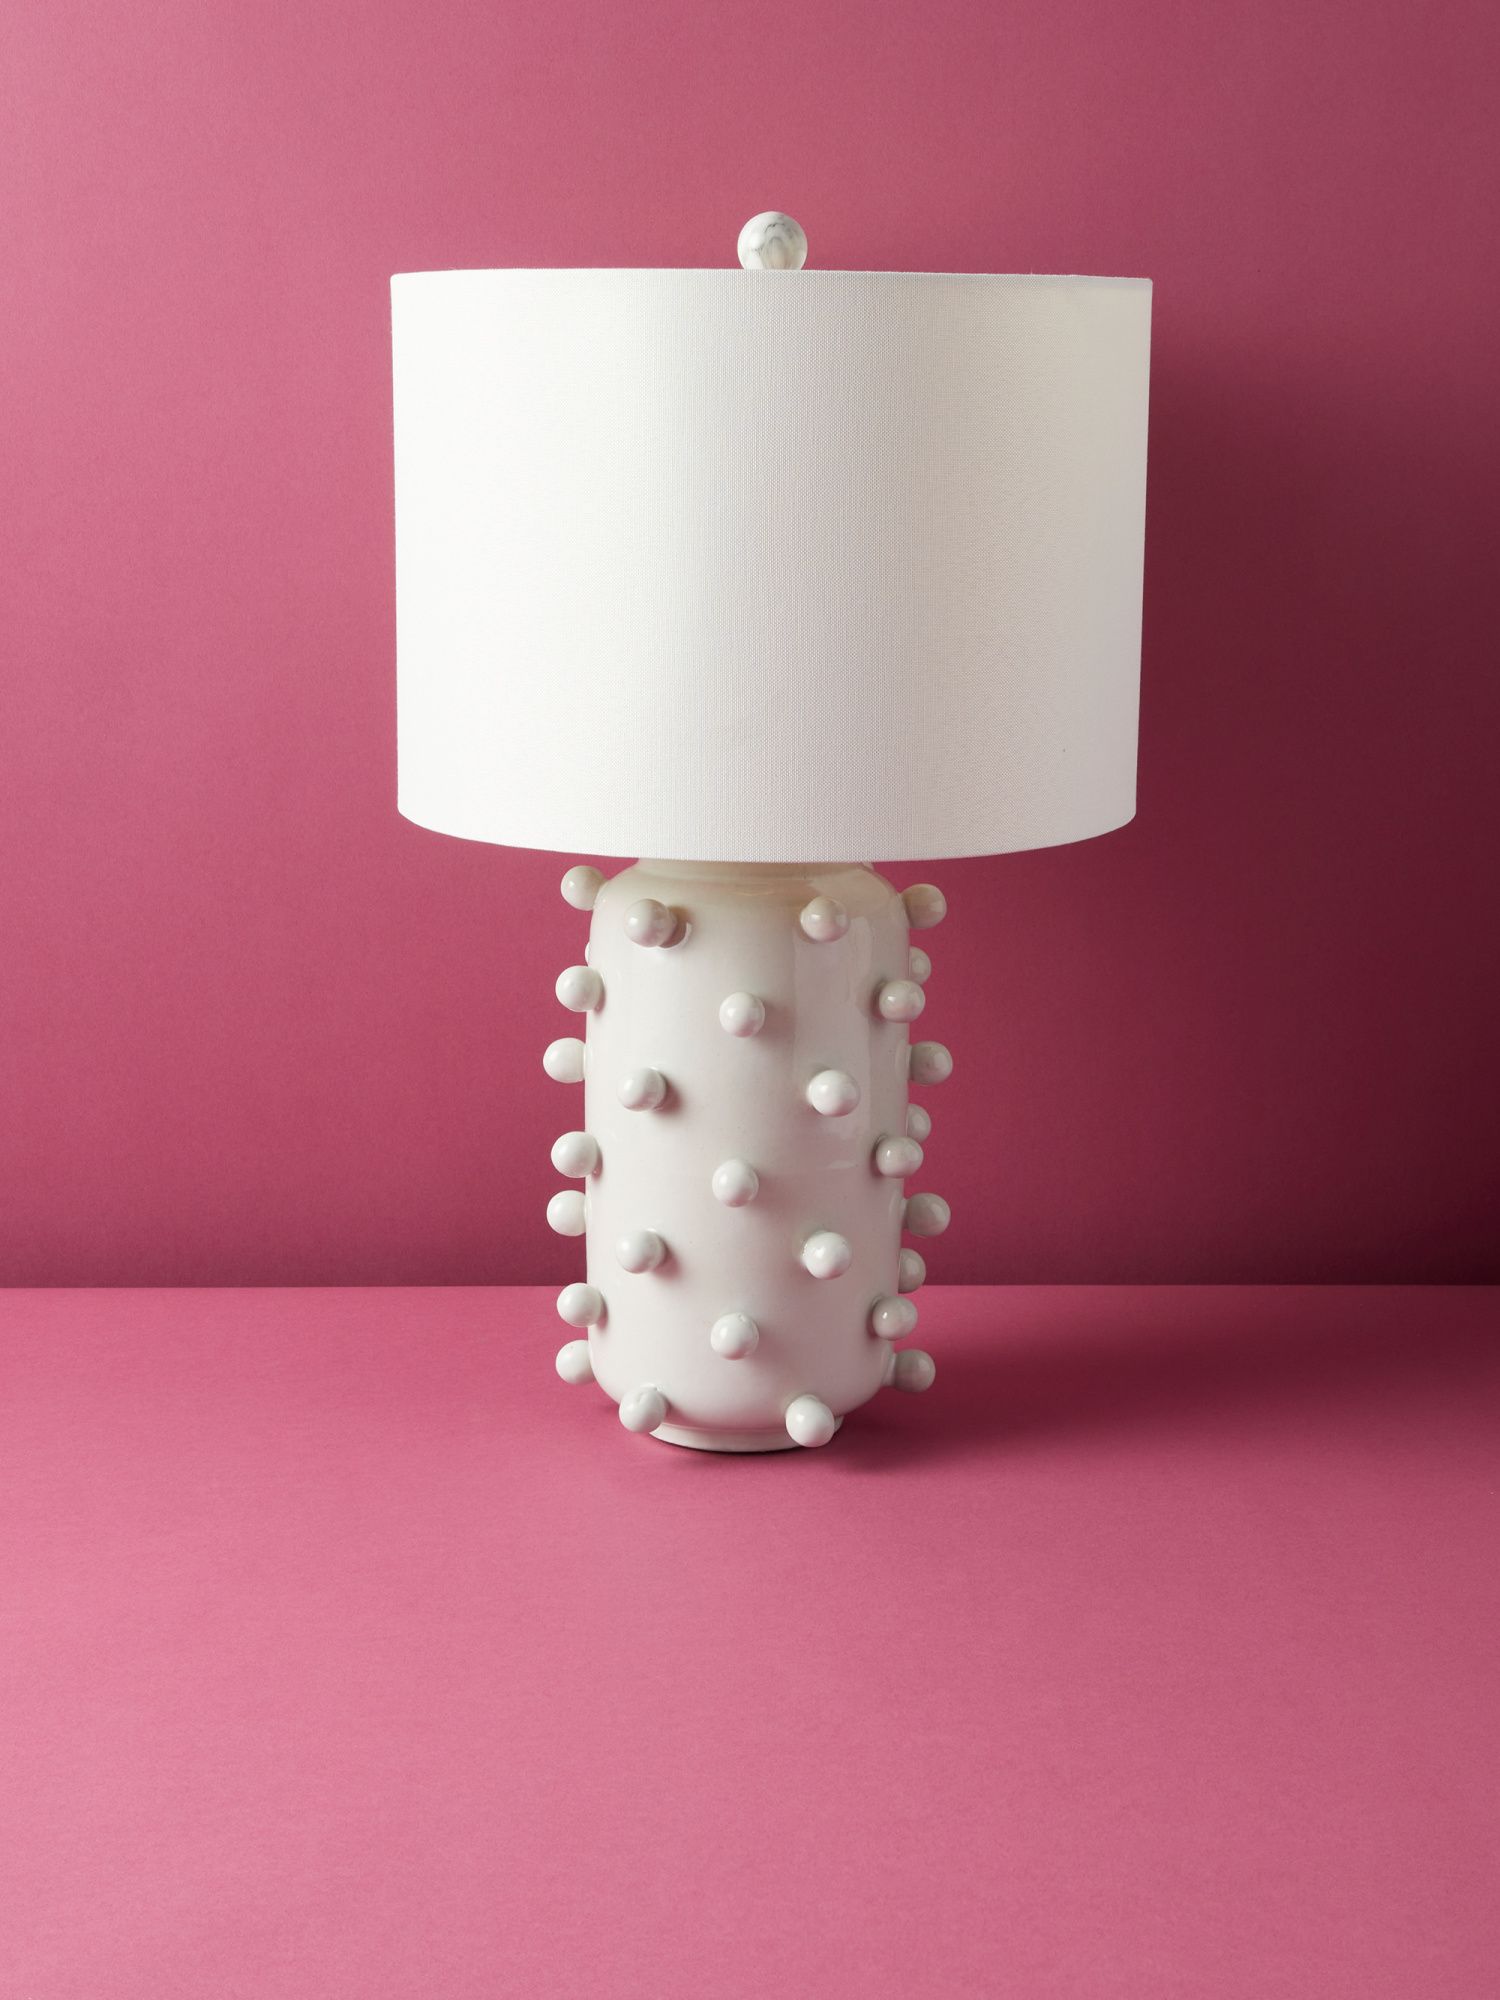 23in Ceramic Textured Dot Table Lamp | Table Lamps | HomeGoods | HomeGoods